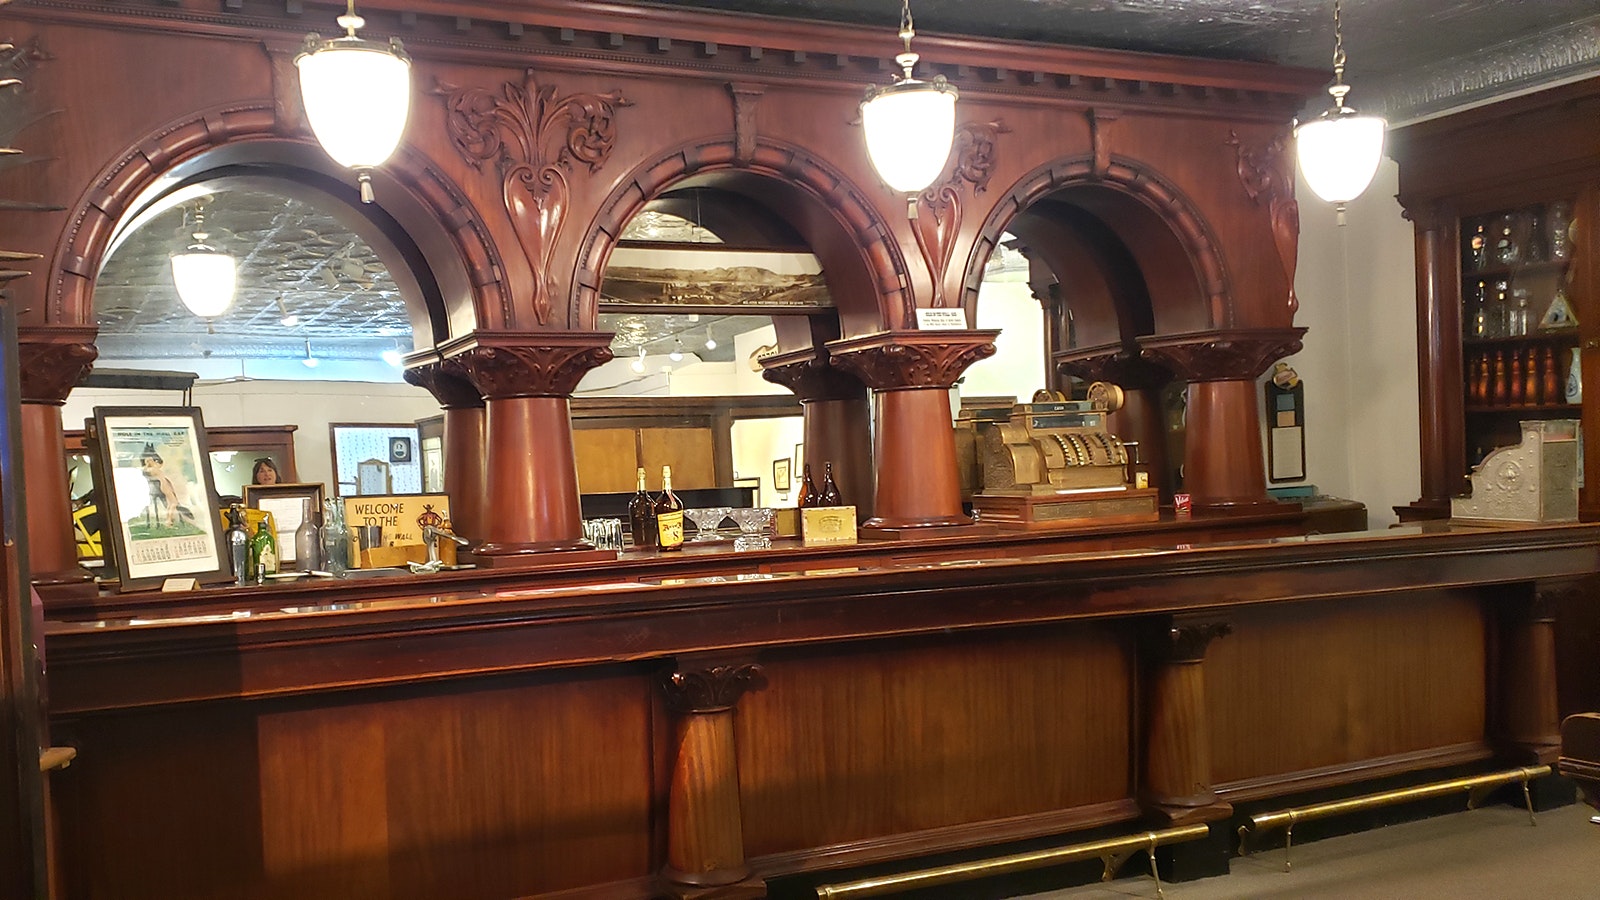 The massive back bar and bar from the Hole in the Wall Bar is housed in the Hot Springs County Historical Museum and Cultural Center.